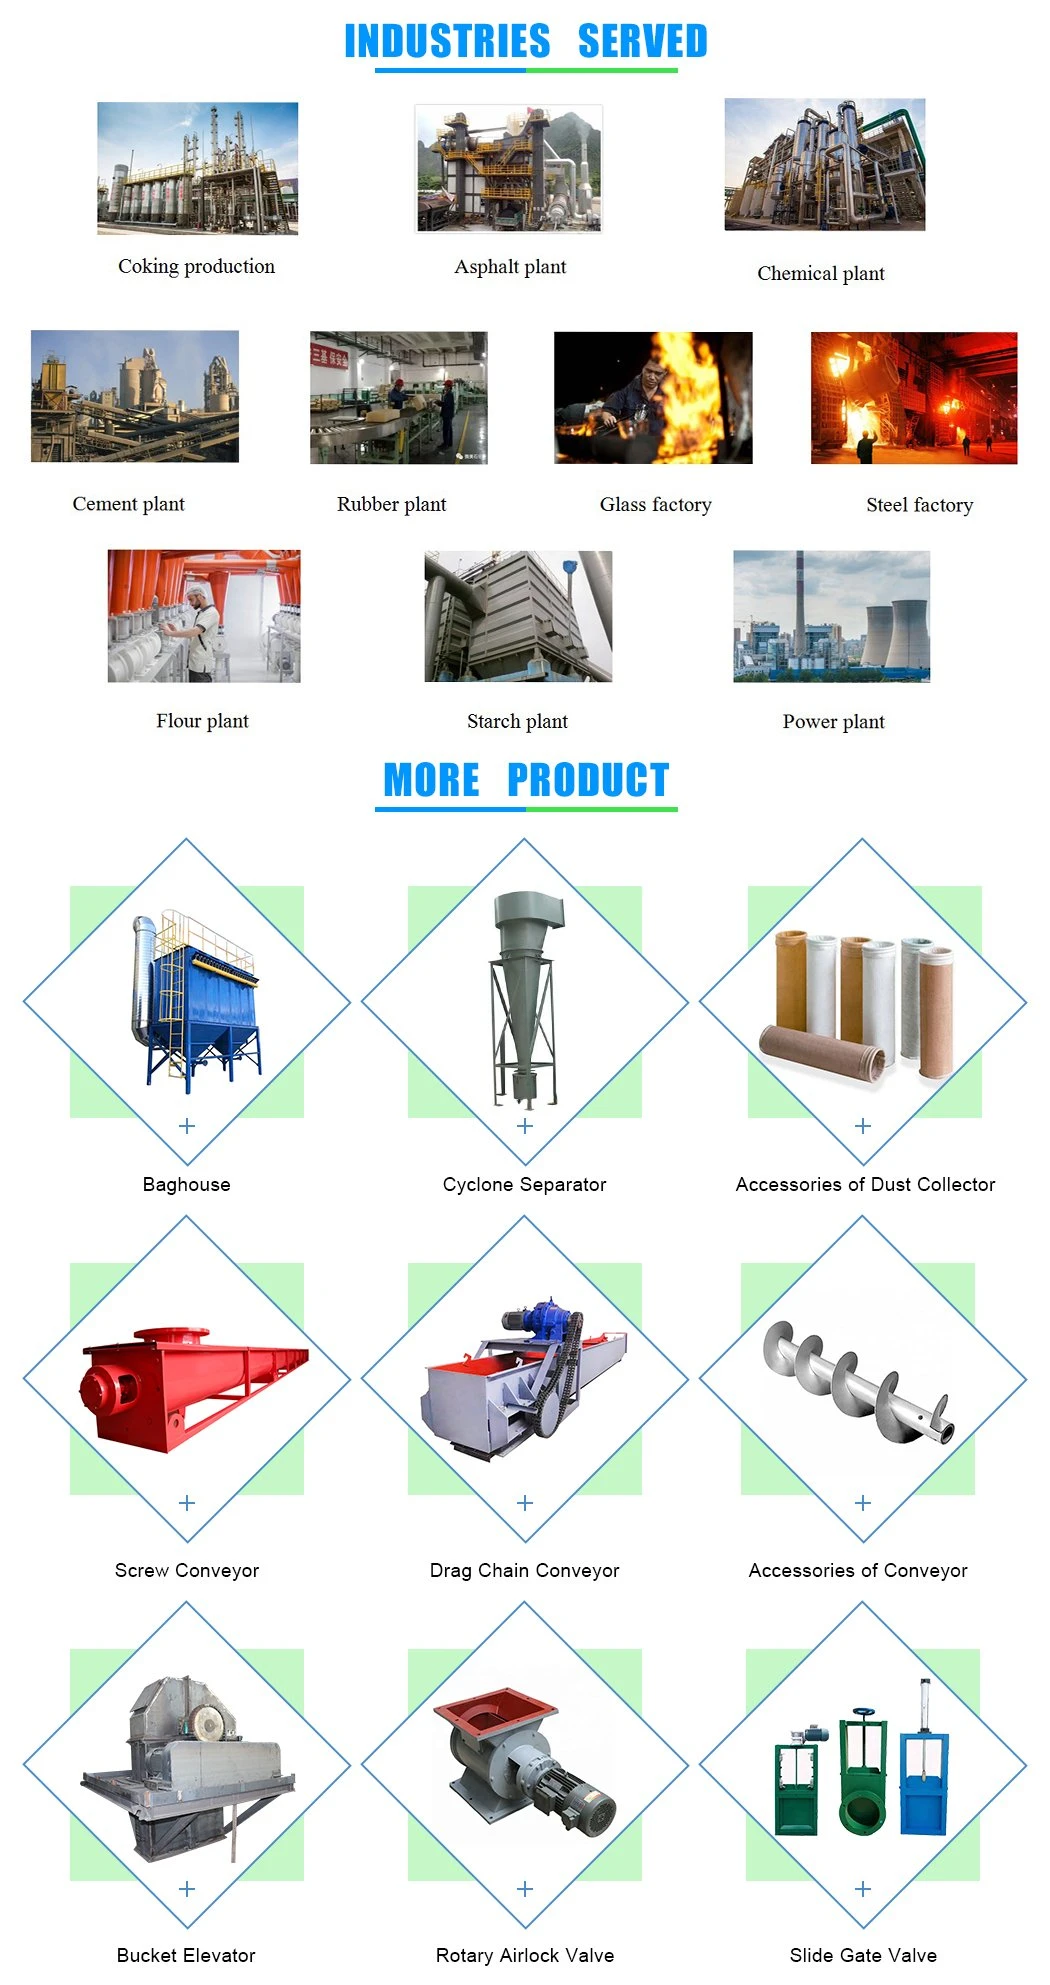 Horizontal or Inclined Packing Flexible Soft Tube Pipe Screw Conveyors for Powders